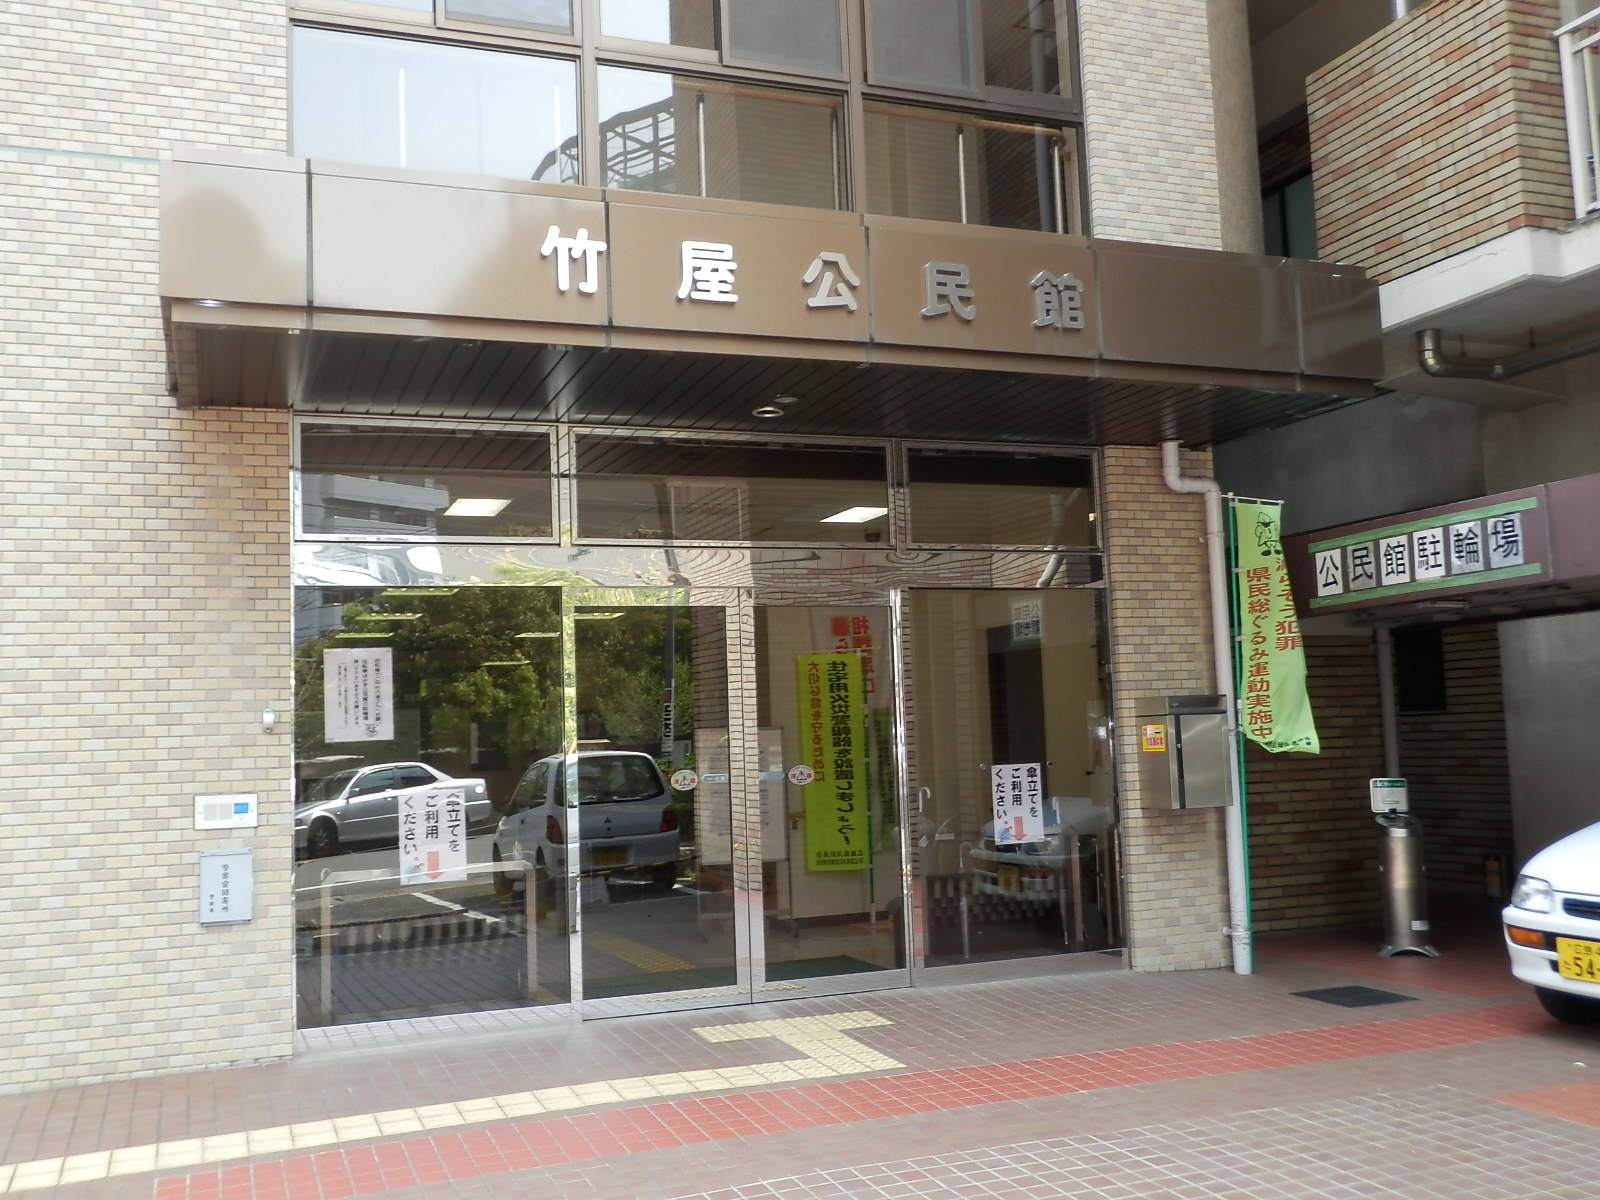 Government office. 305m to Takeya-cho public hall (public office)